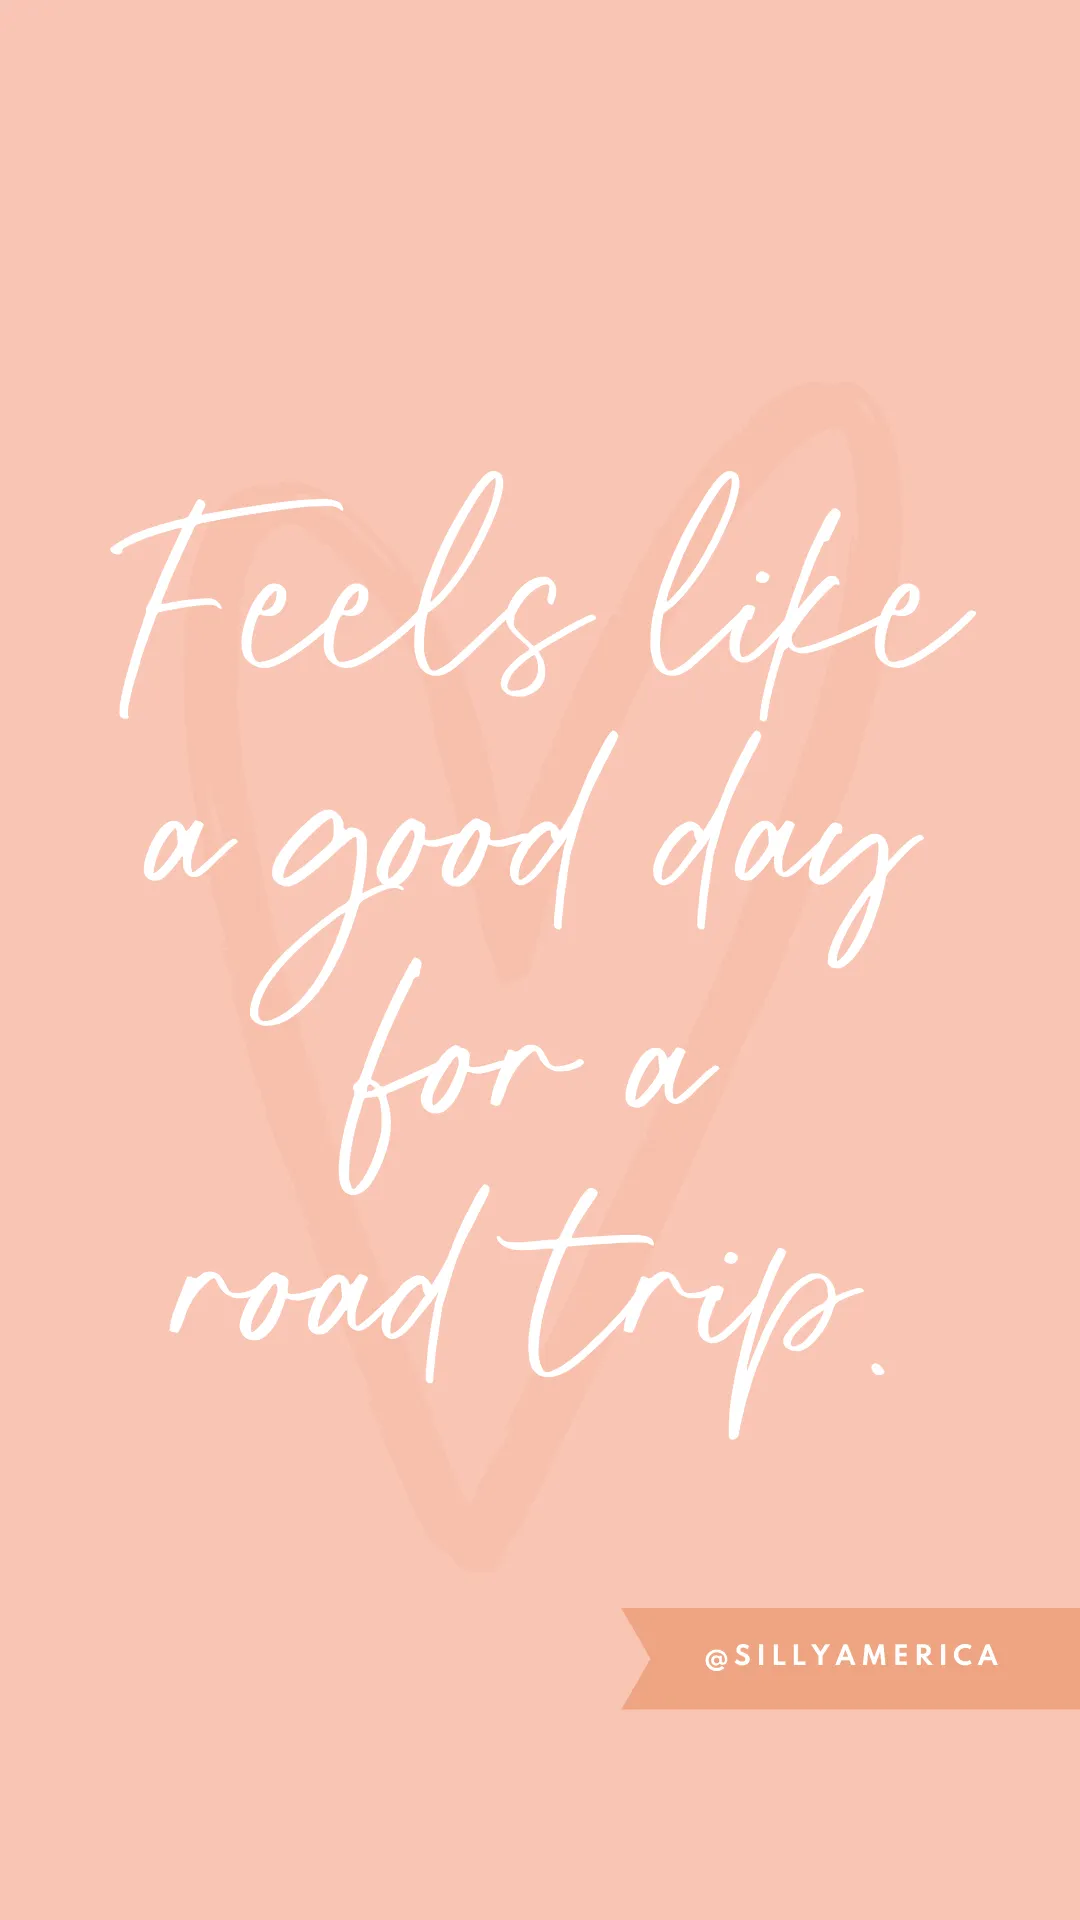 Feels like a good day for a road trip. - Road Trip Captions for Instagram